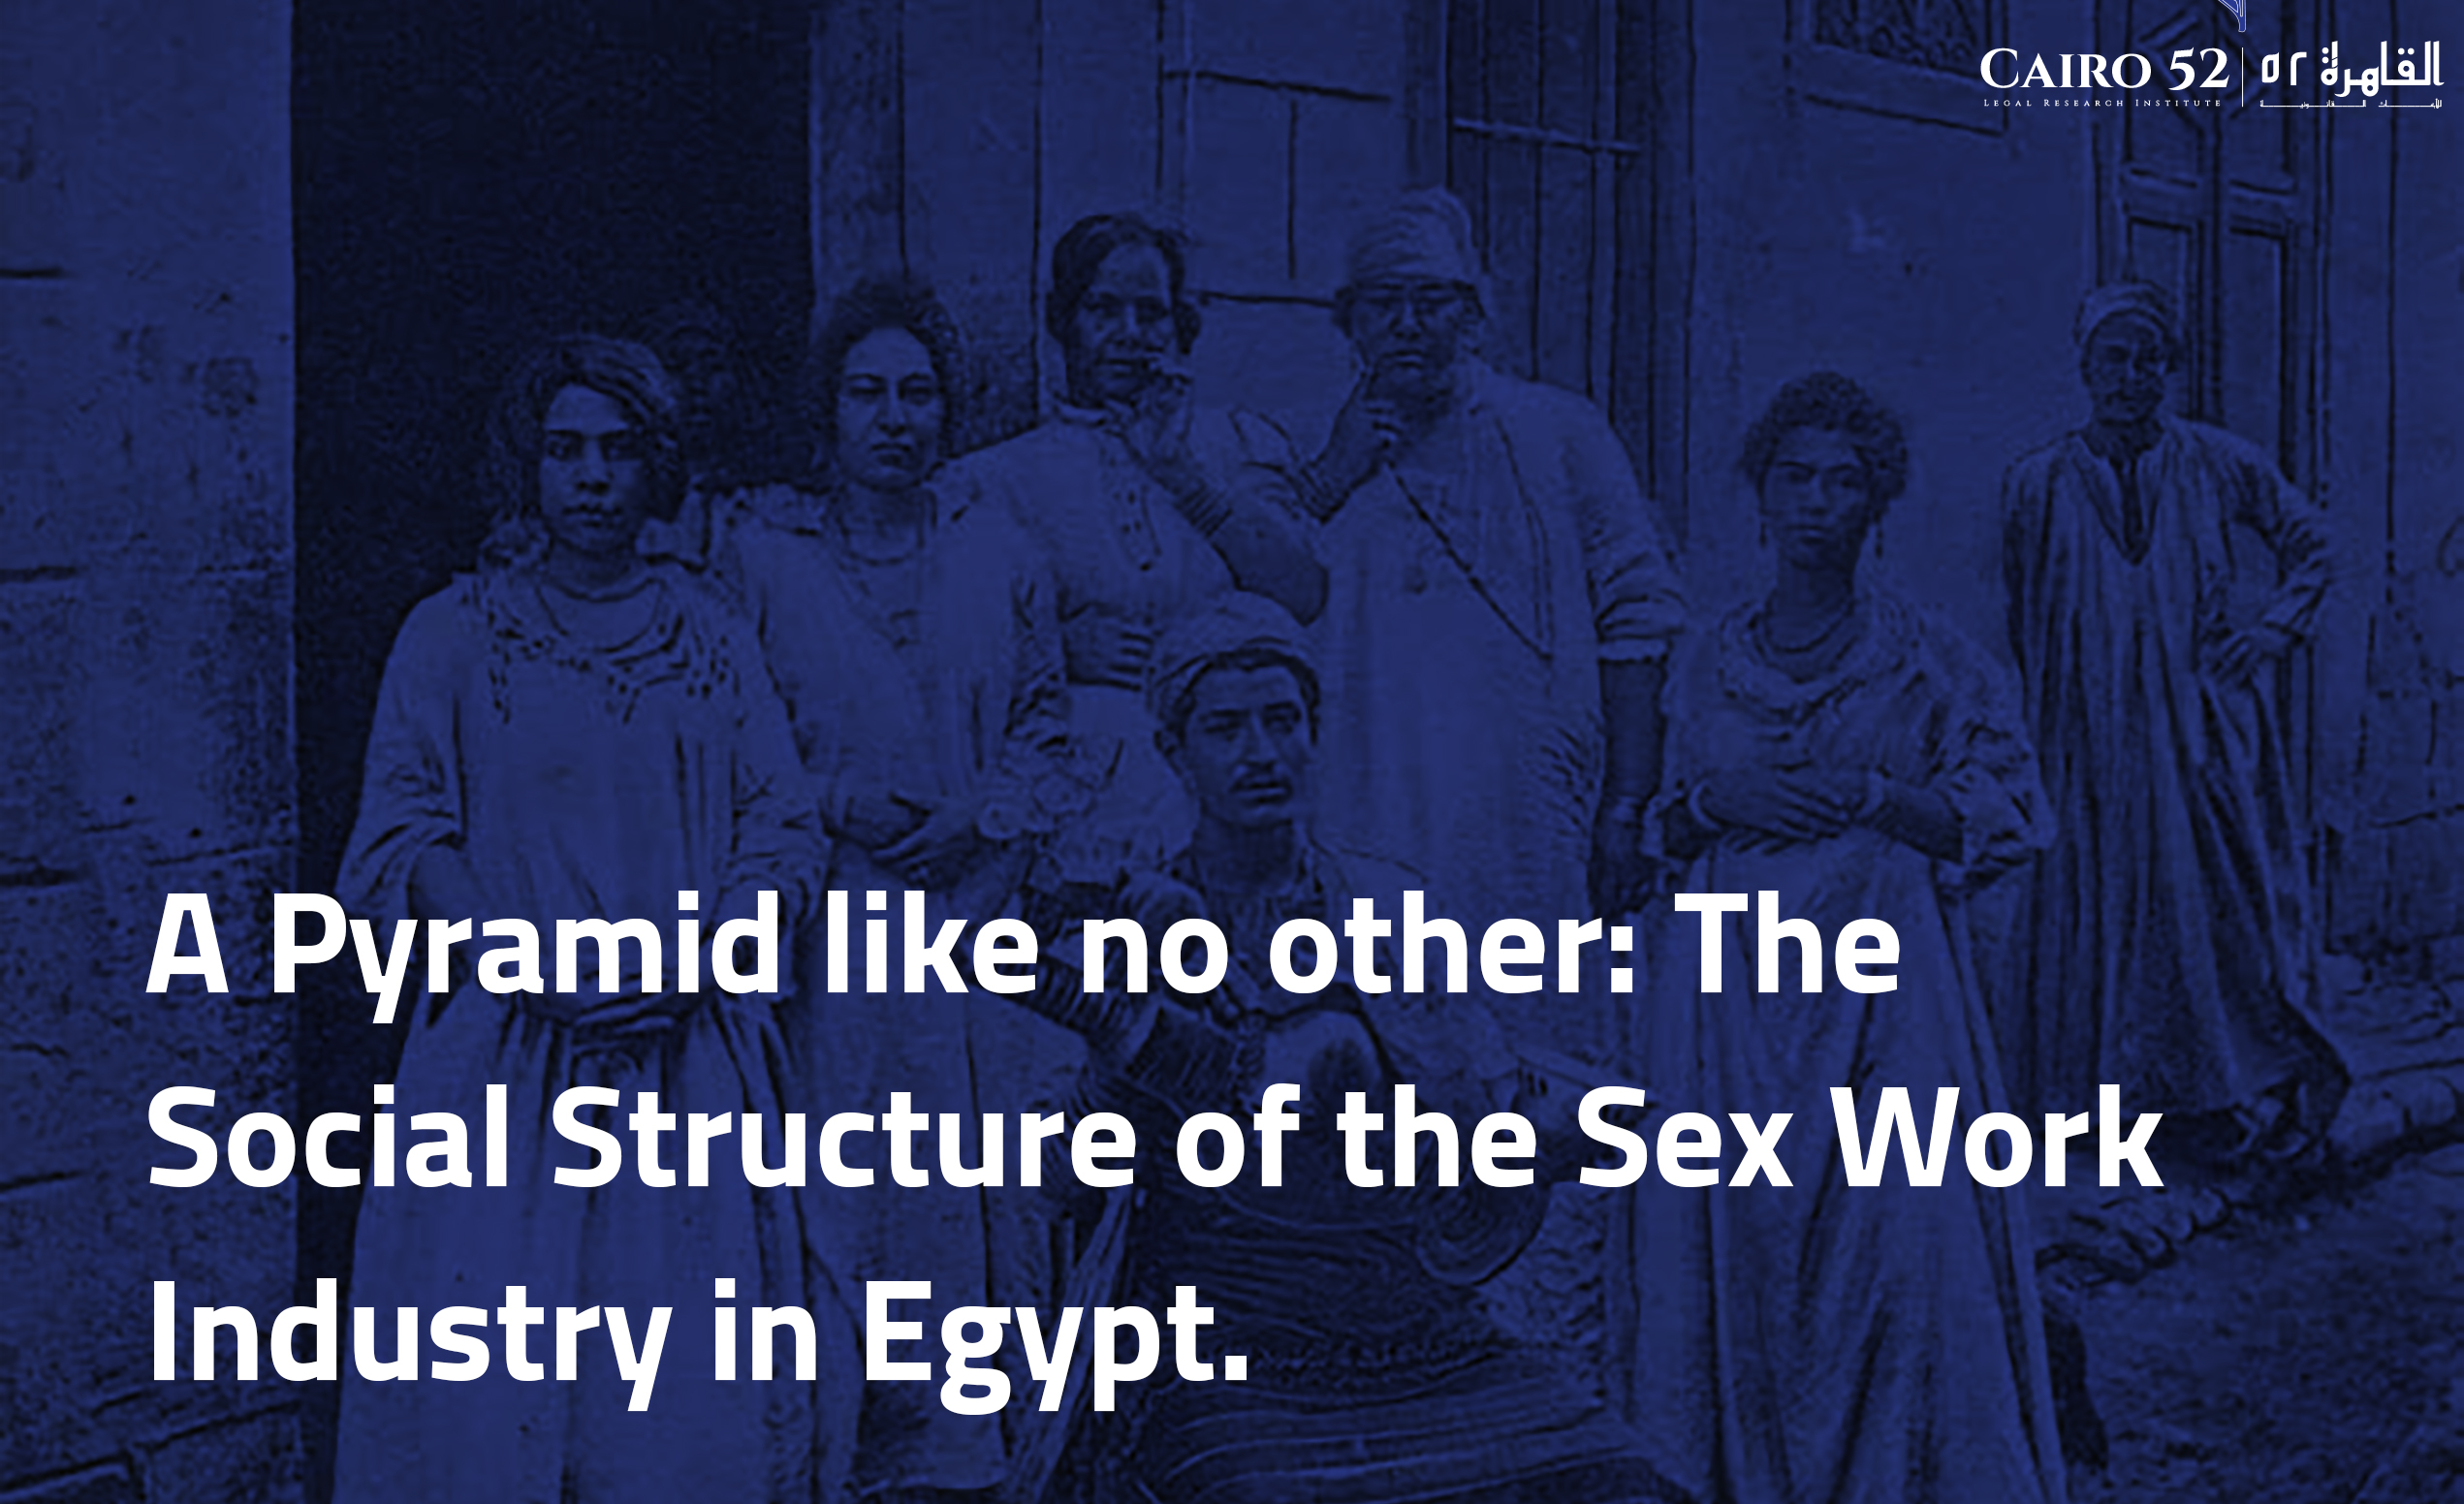 A man have sex in Cairo